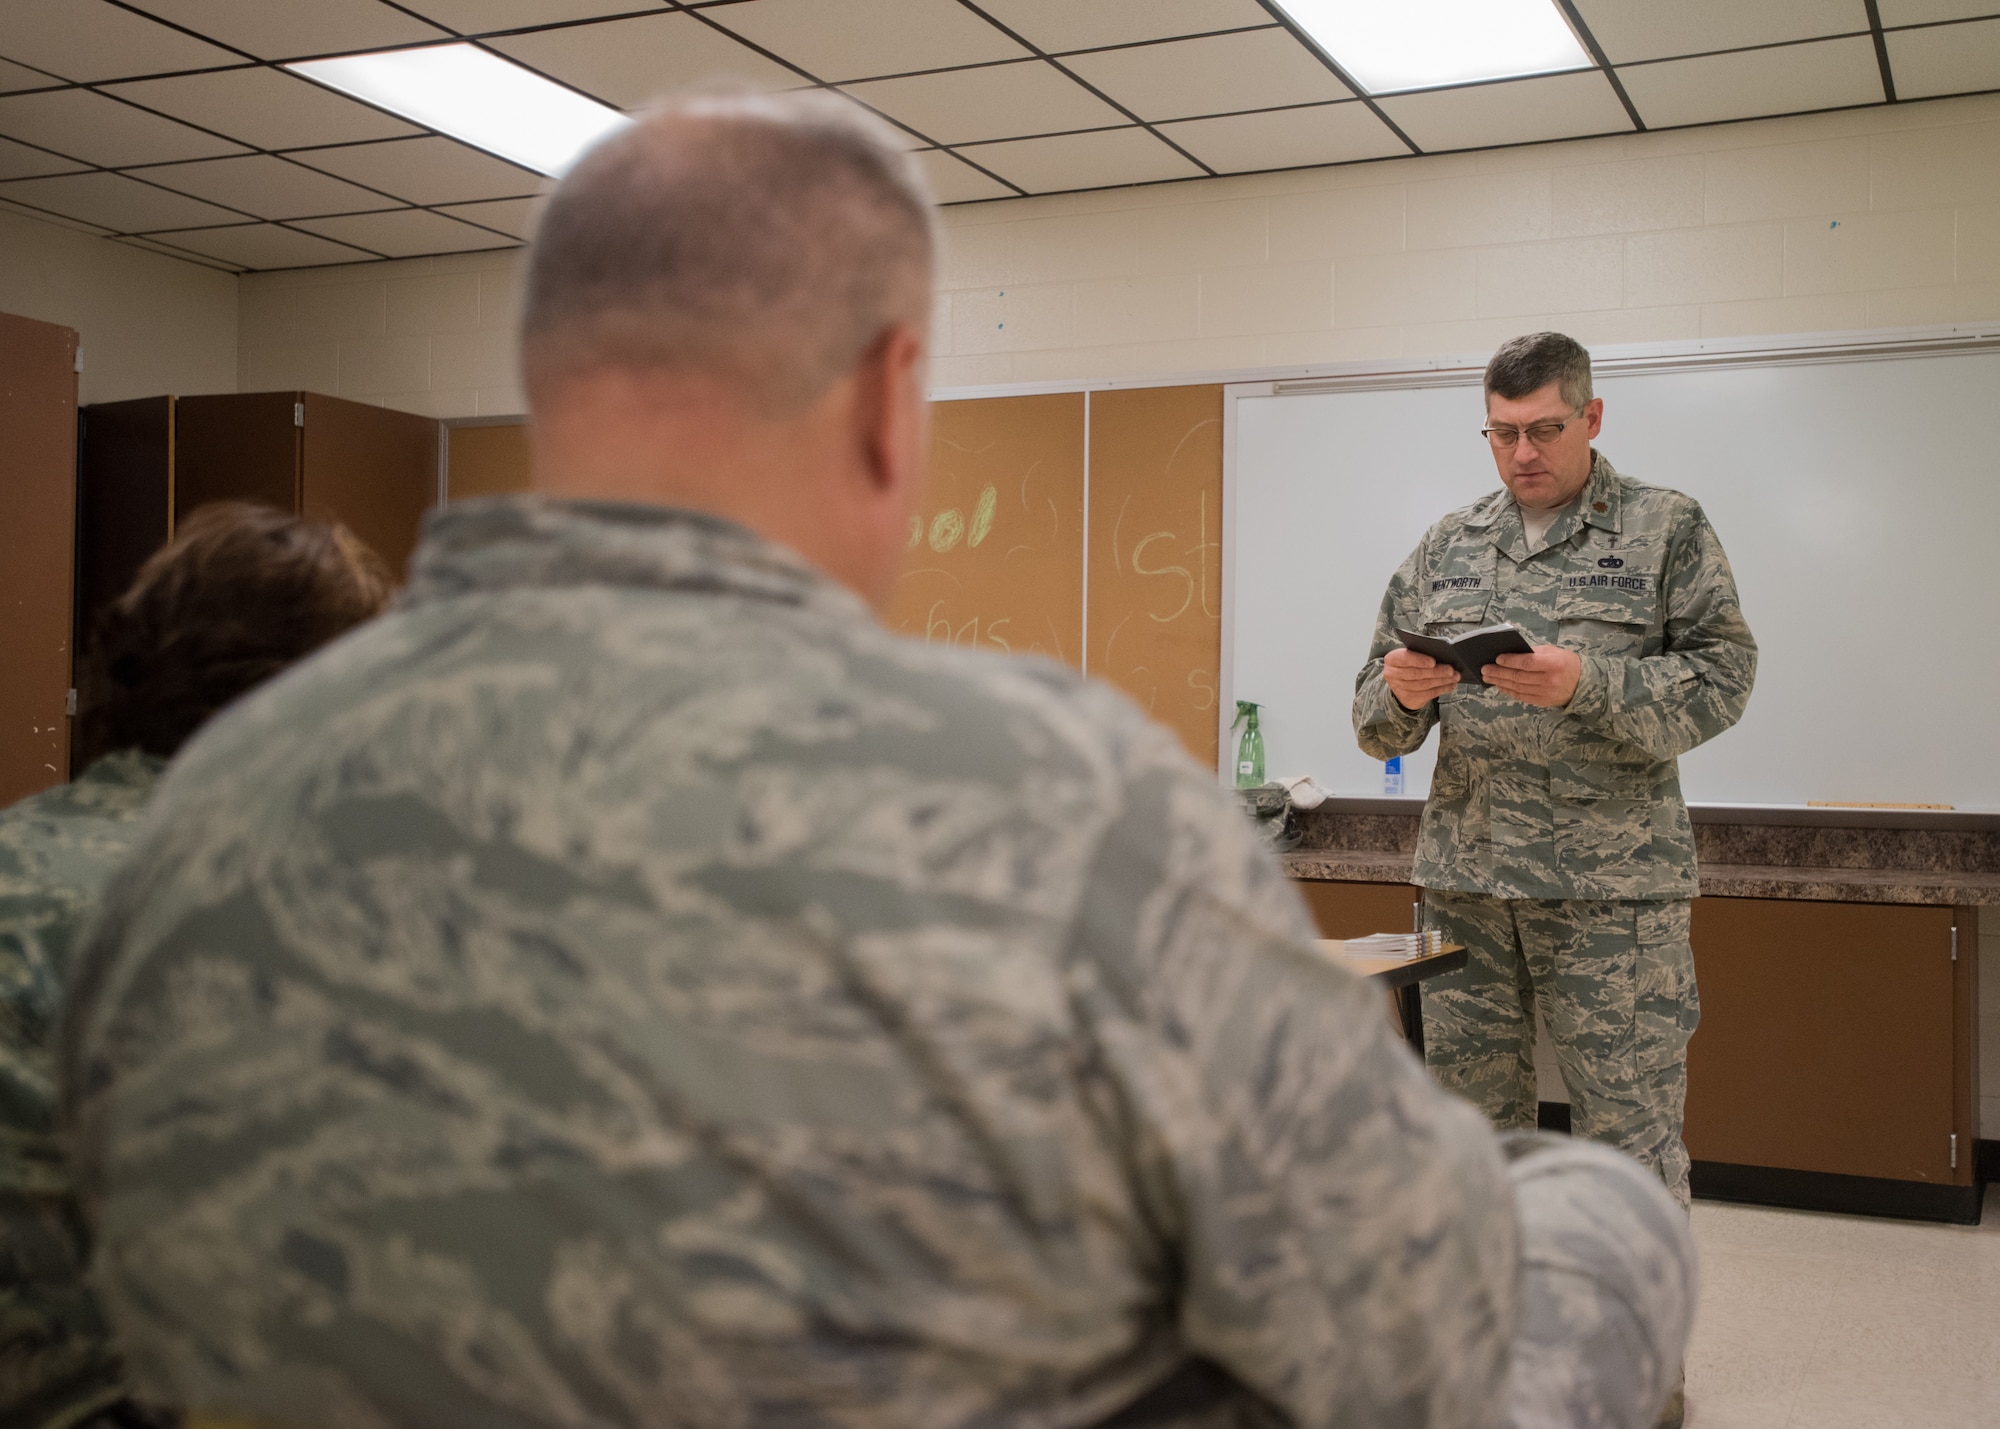 U.S. Air Force Chaplain Kerry Wentworth, of the 123rd Airlift Wing, Kentucky Air National Guard, leads a religious service for military members at Carlisle County High School in Bardwell, Ky., July 17, 2016, during the Bluegrass Medical Innovative Readiness Training. The program will offer medical and dental care at no cost to residents in three Western Kentucky locations from July 18 to 27.(U.S. Air National Guard photo by Master Sgt. Phil Speck)